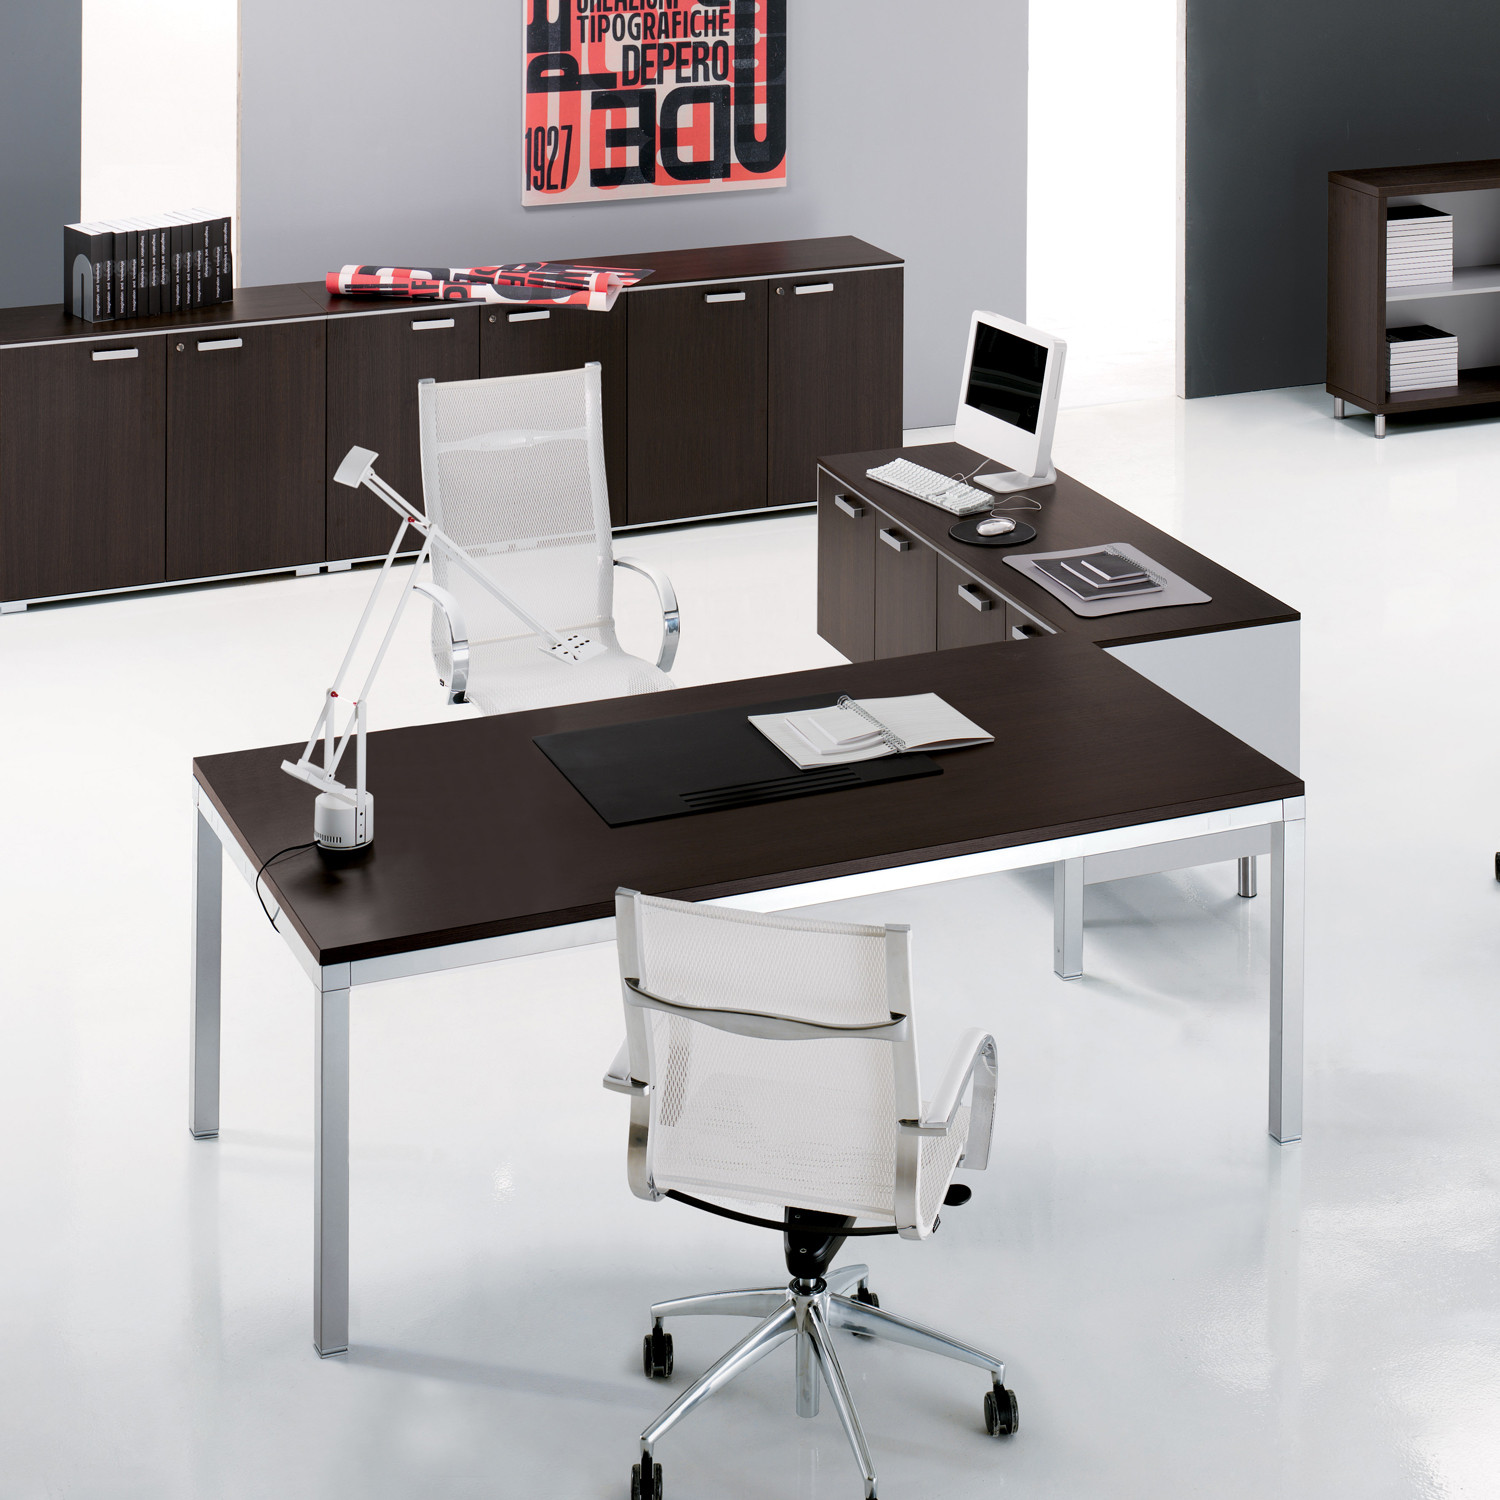 Link Executive Modular Desking System combined with Side Storage